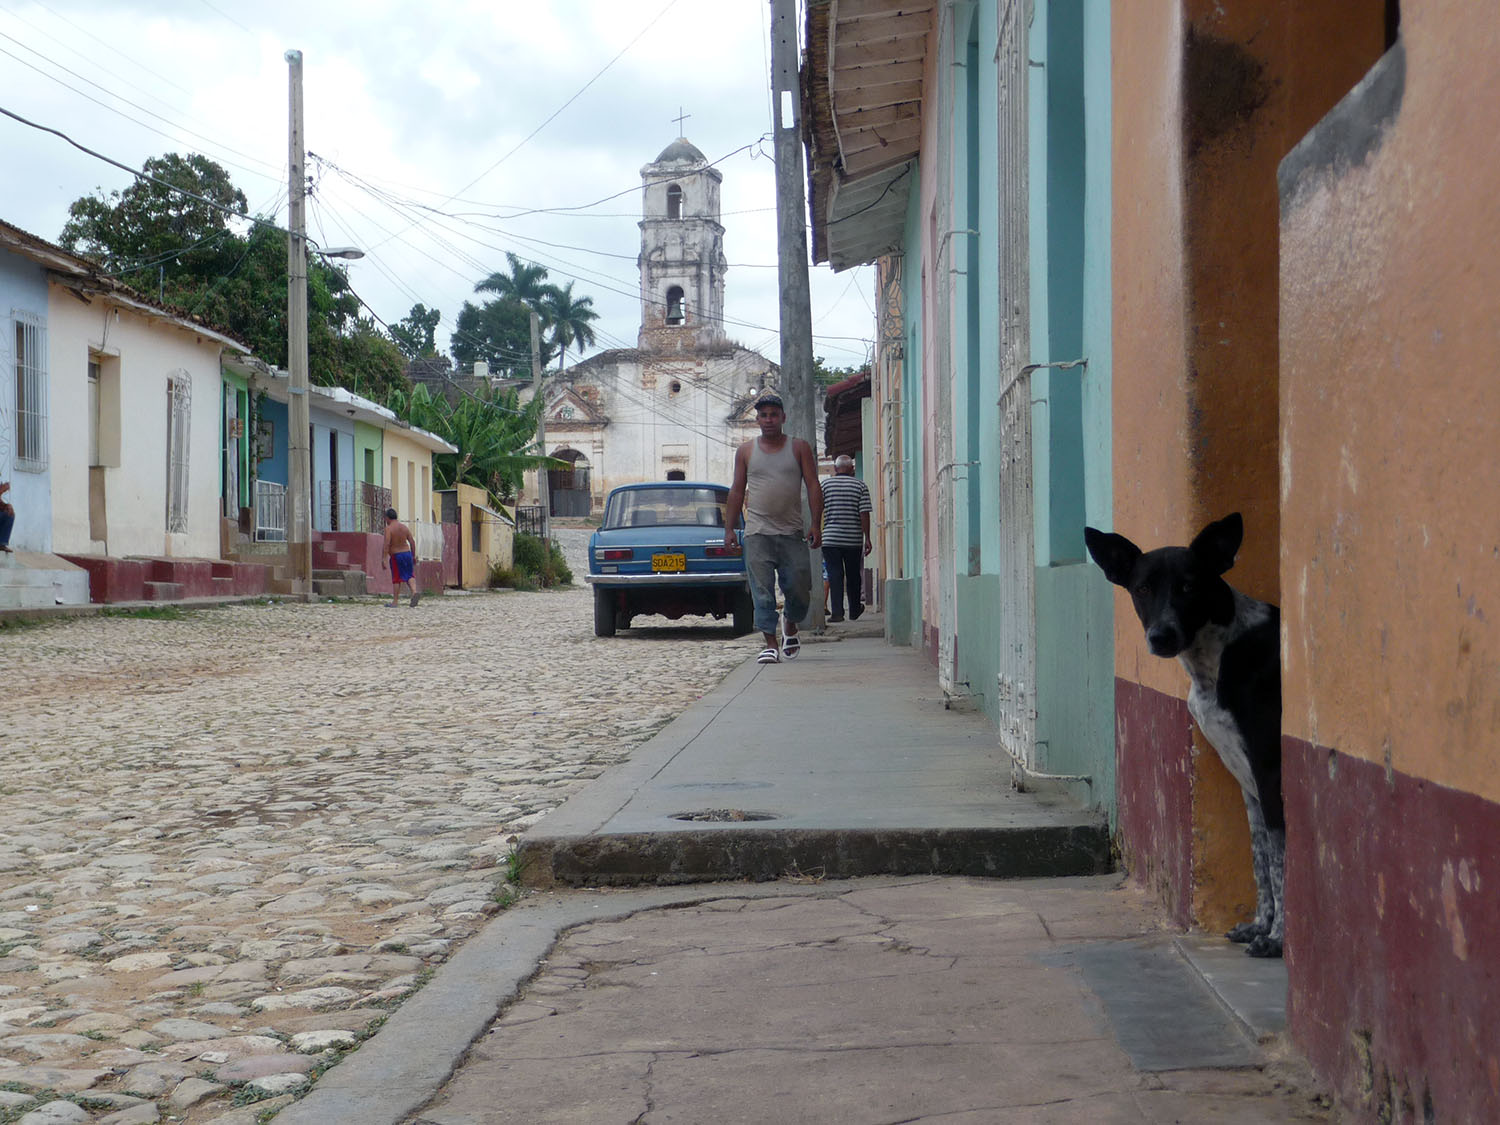 Cuban congregations are reportedly growing since the U.S. and Cuba began normalizing relations in 2014. (Photo/Bonnie Craven Francis/Creative Commons)